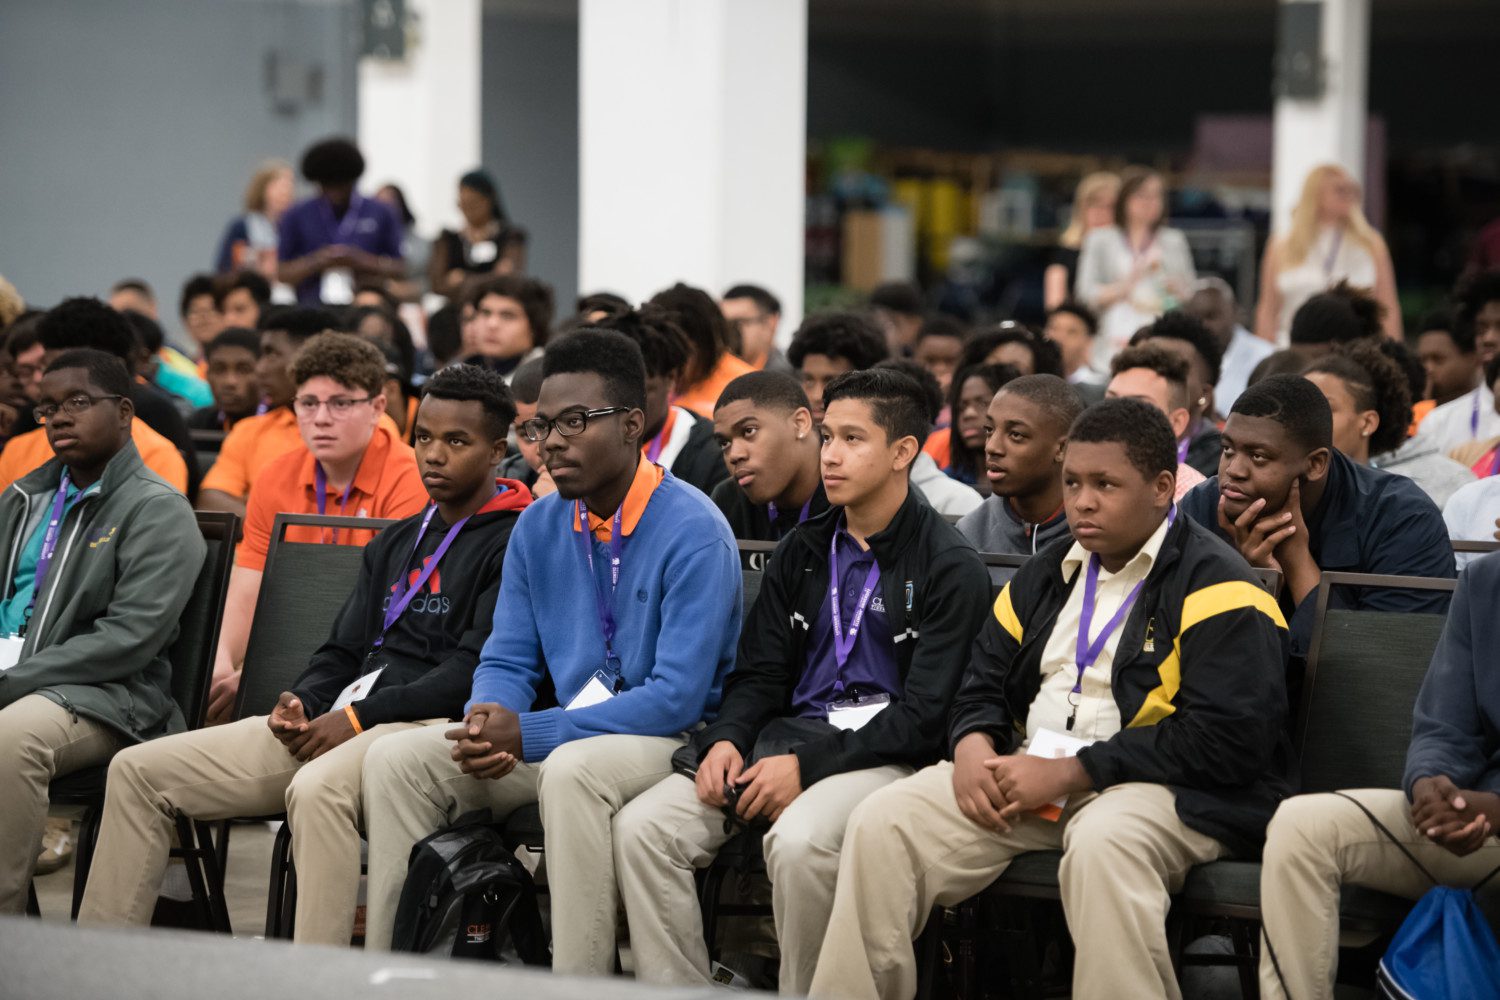 Students at the 2018 Men of Color National Summit